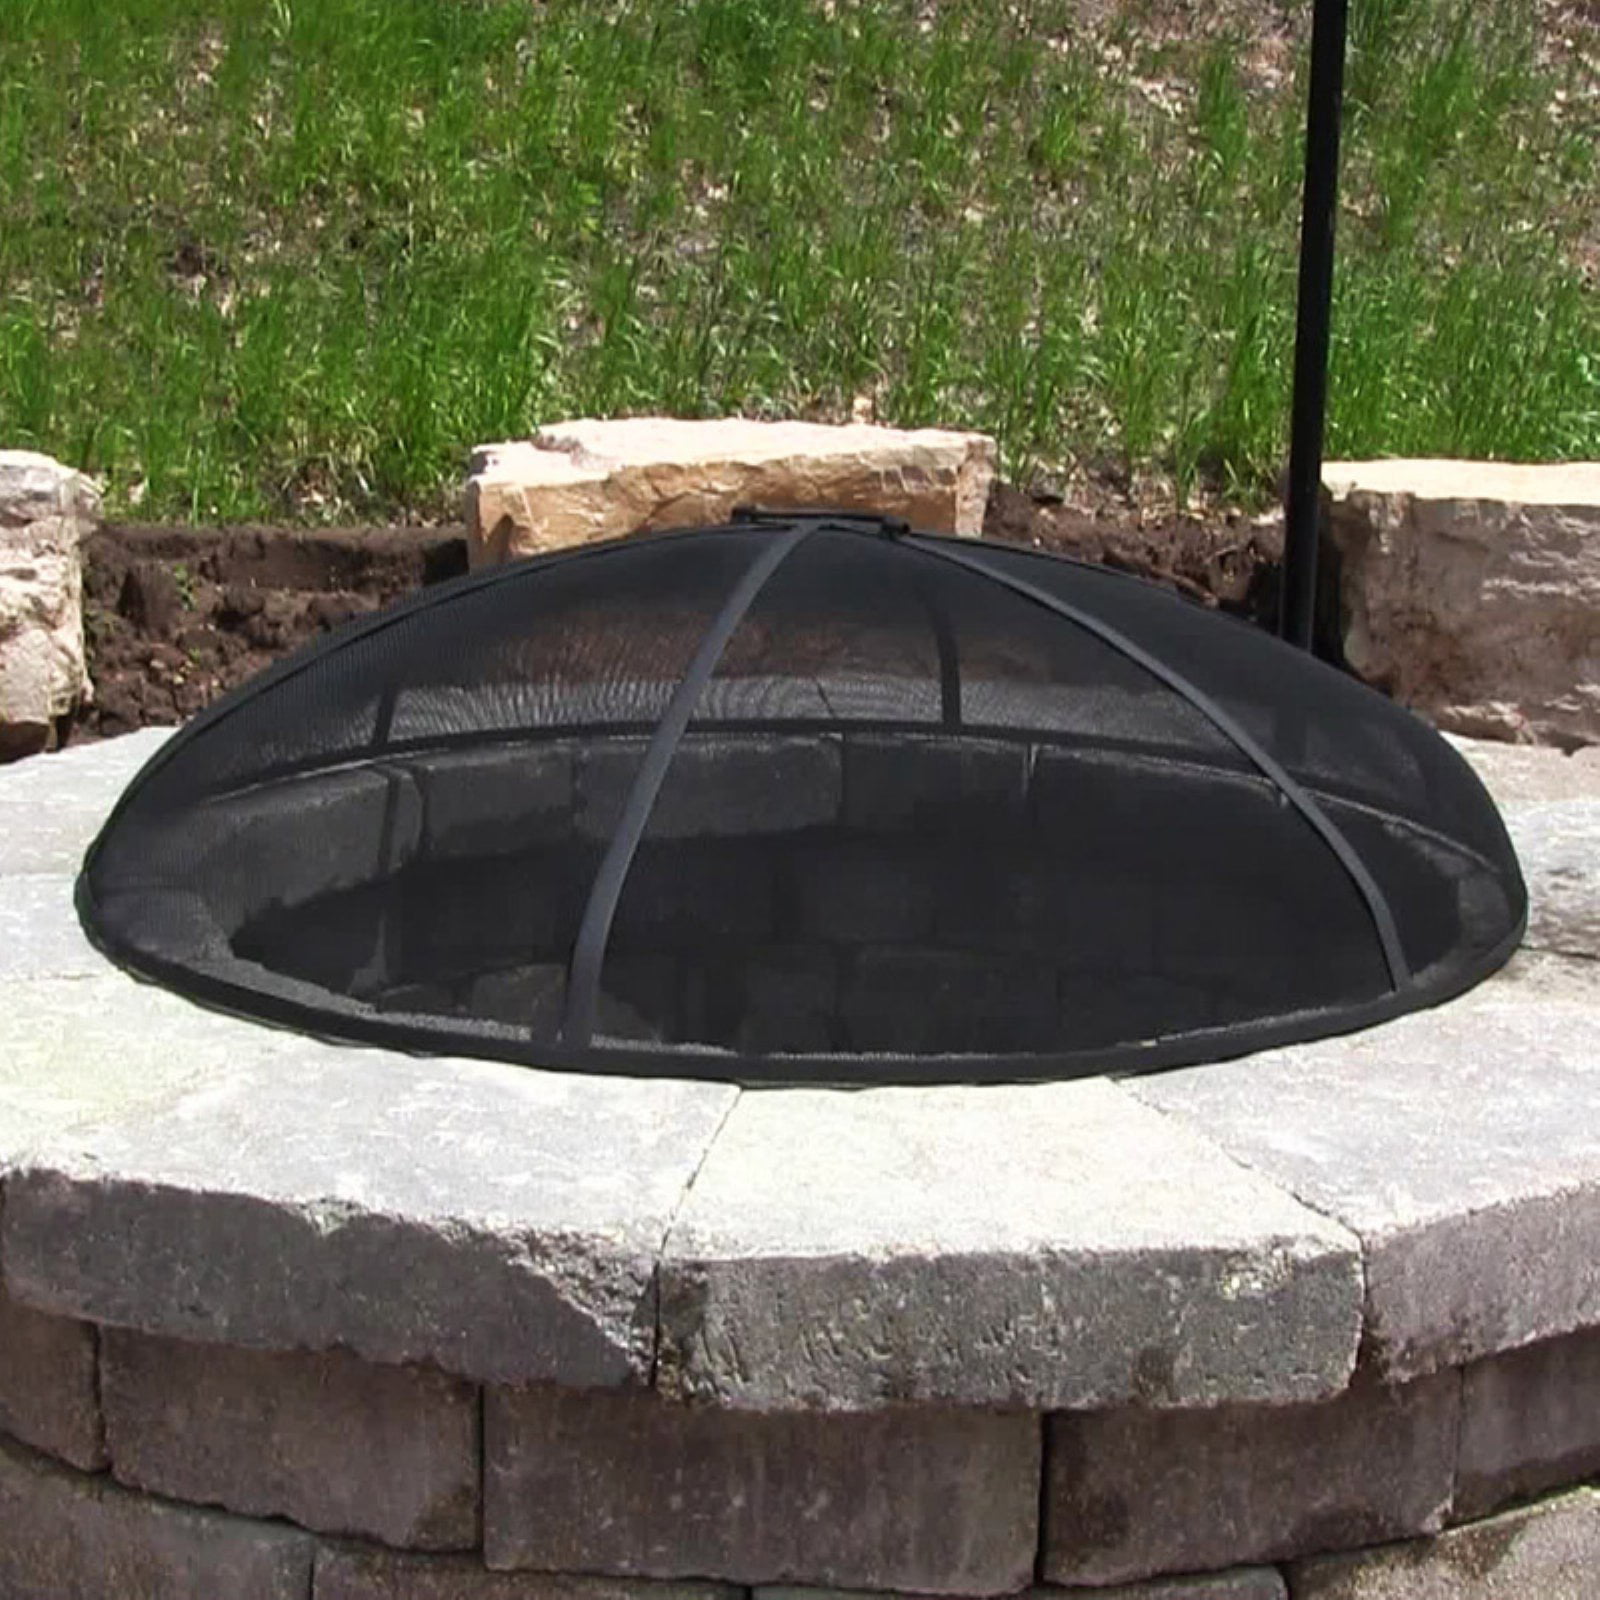 Heavy Duty Fire Pit Spark Screen, How To Make Your Own Fire Pit Screen